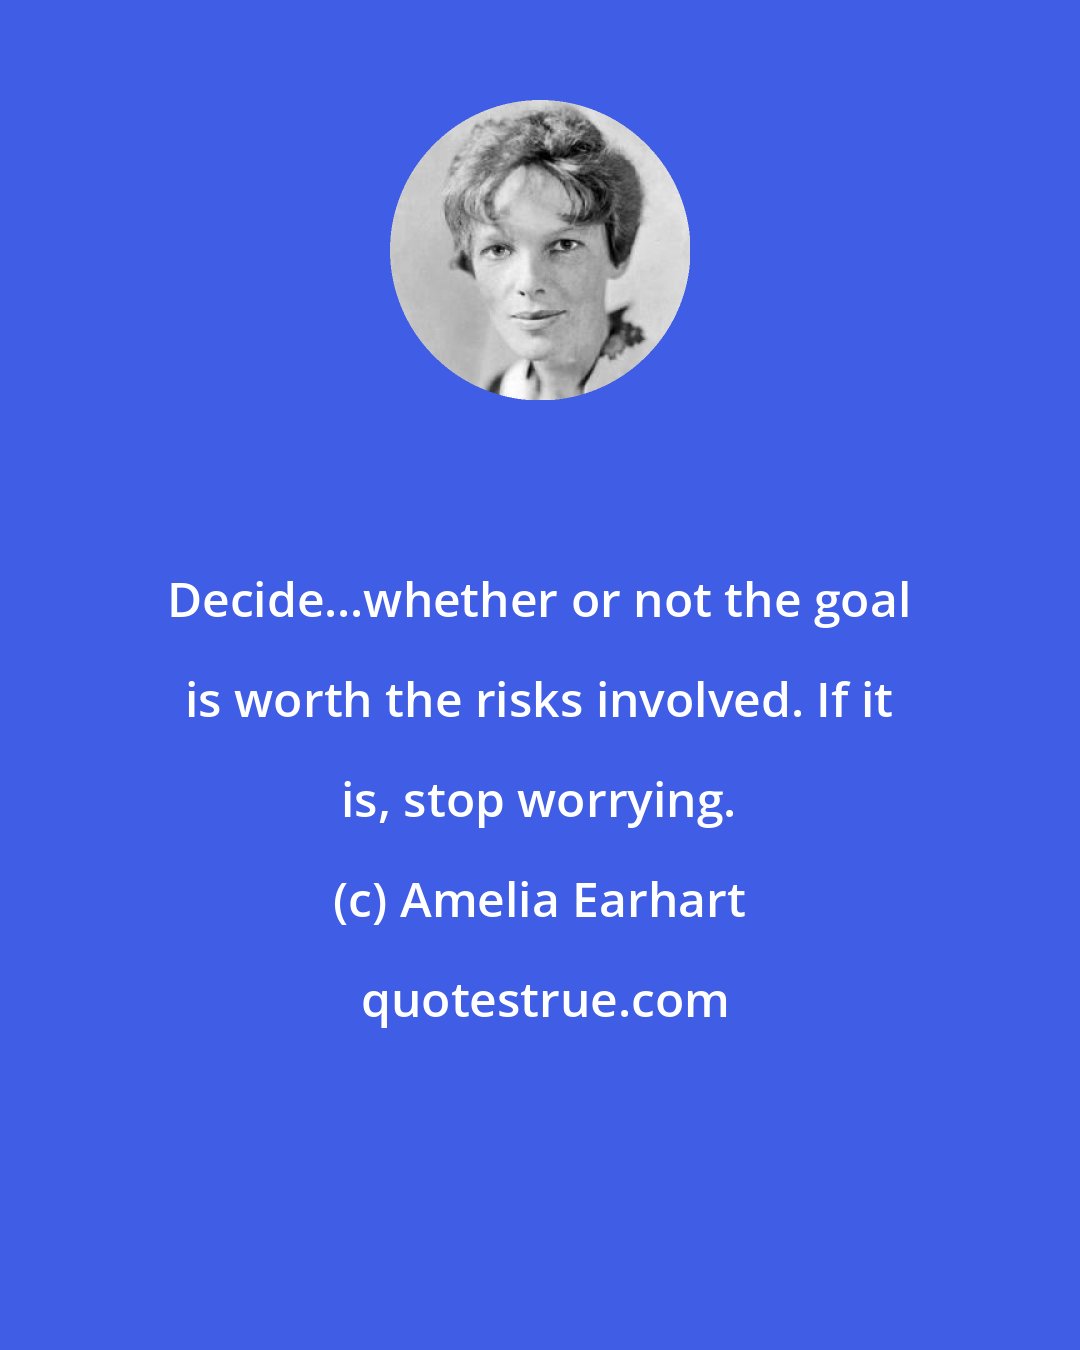 Amelia Earhart: Decide...whether or not the goal is worth the risks involved. If it is, stop worrying.